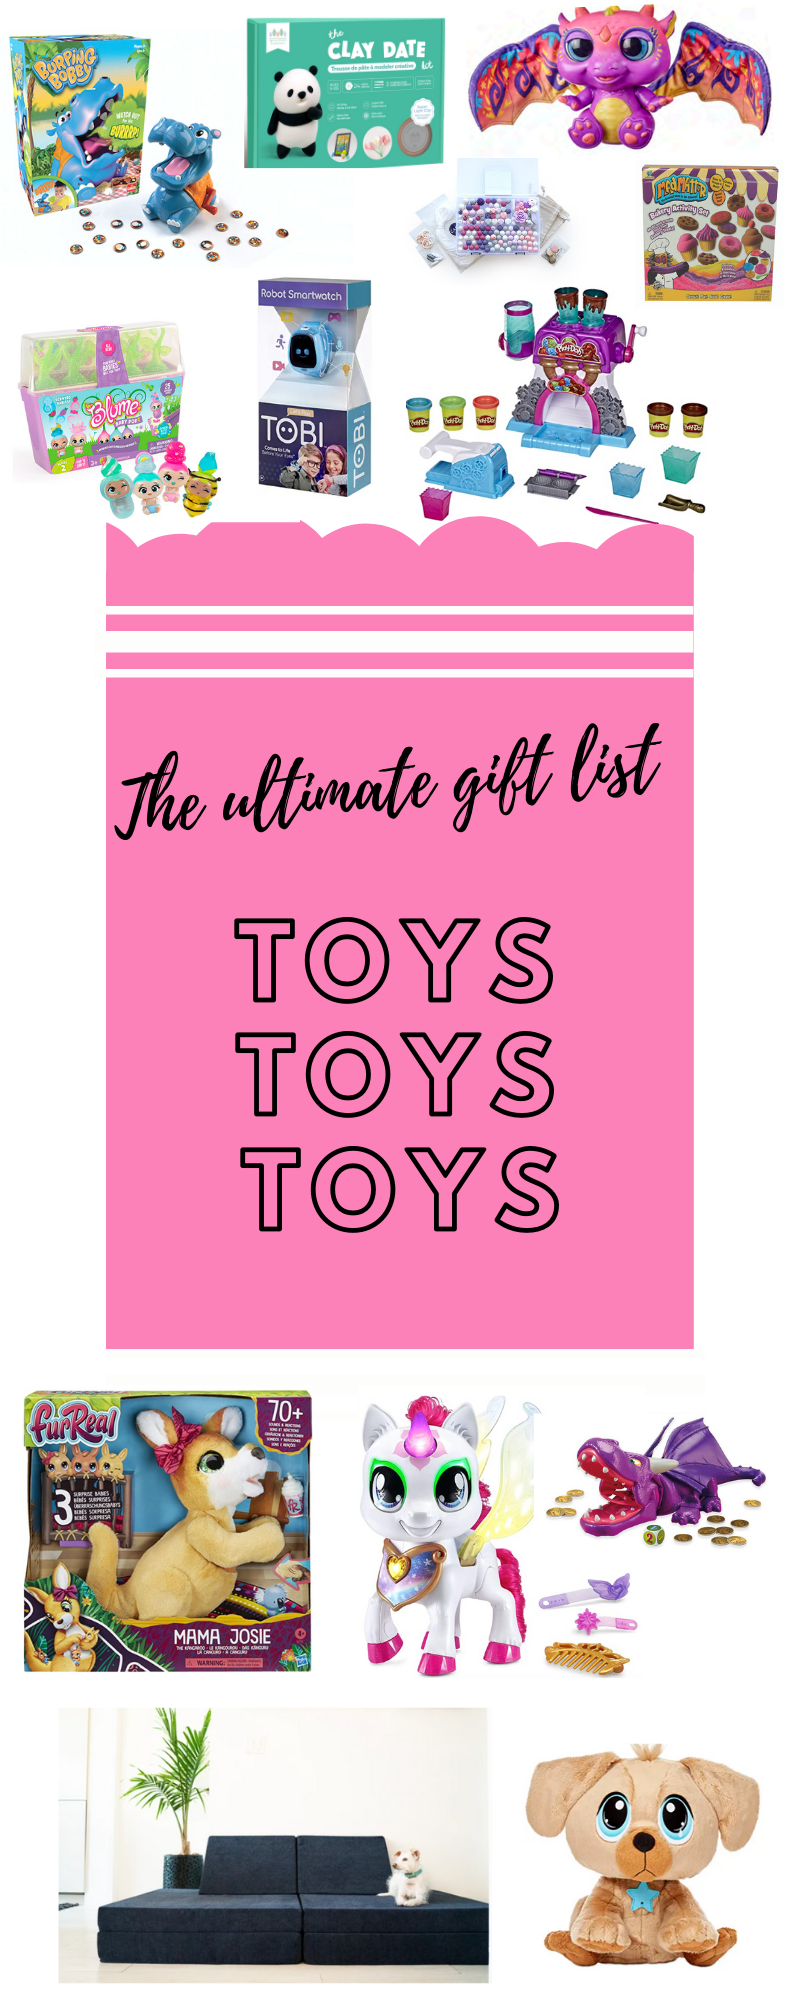 Top toys for kids